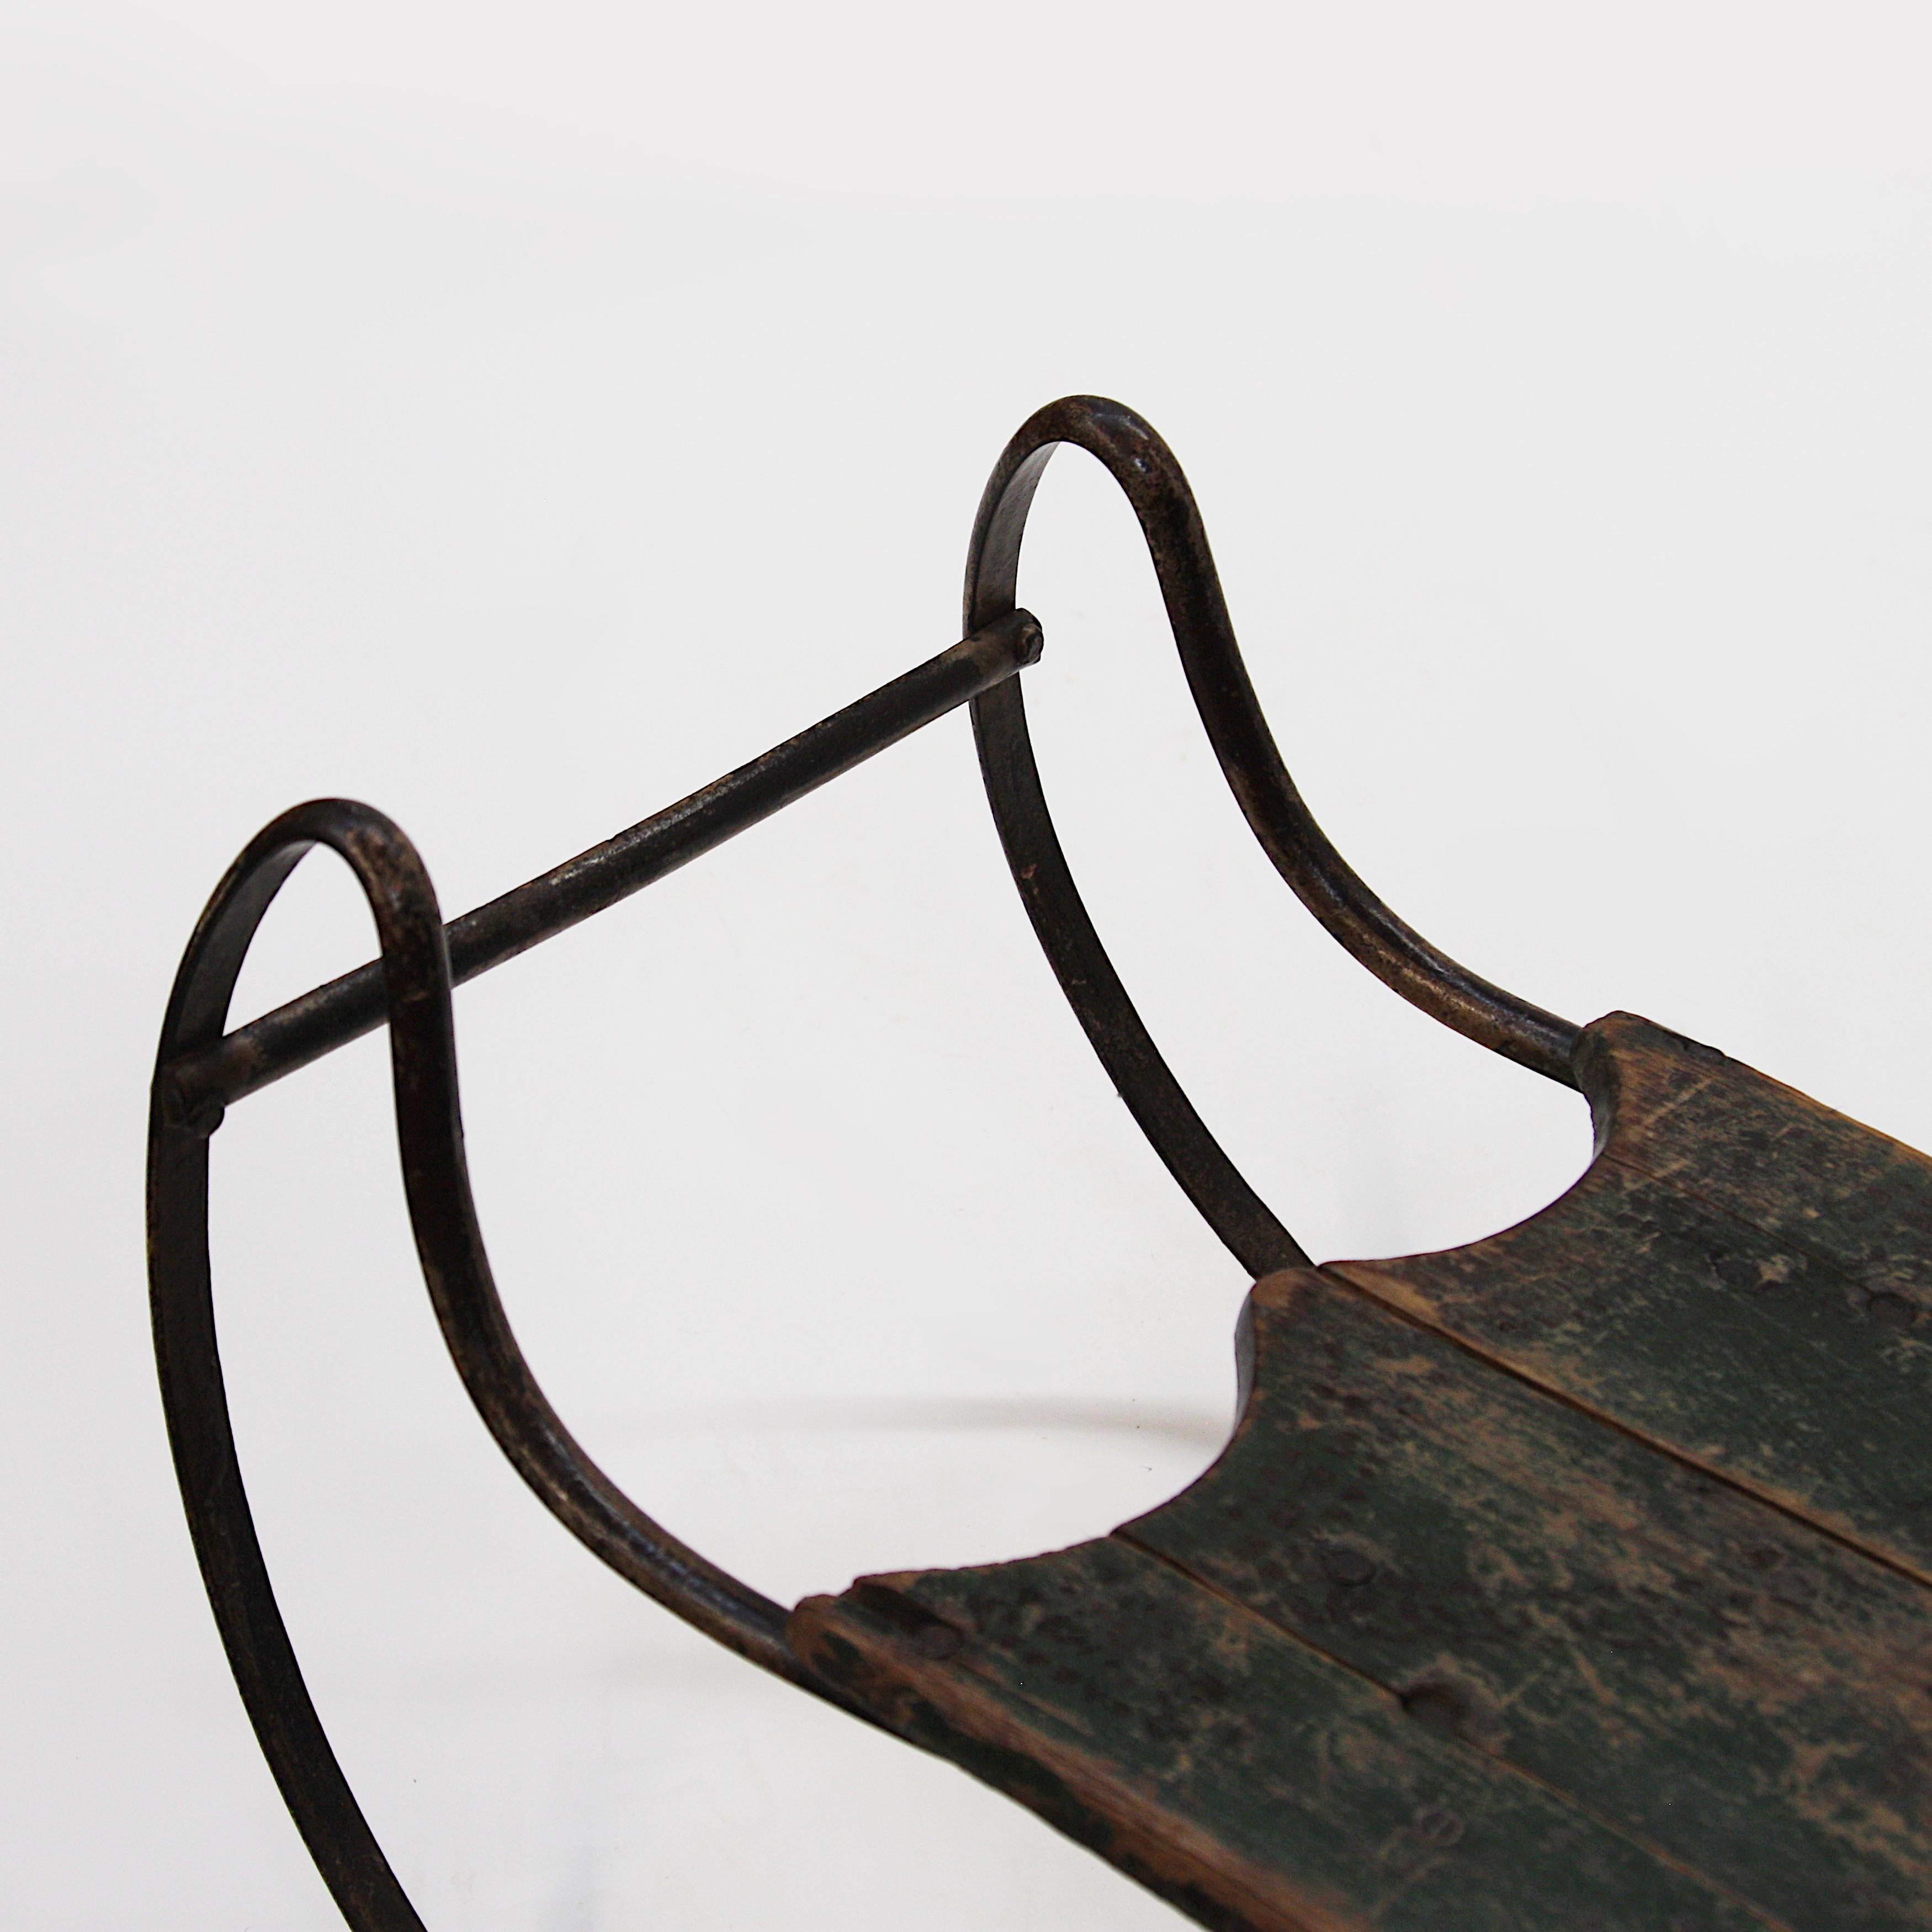 American Antique 19th Century Forged Iron Runner & Painted Wood Child Size Sled For Sale